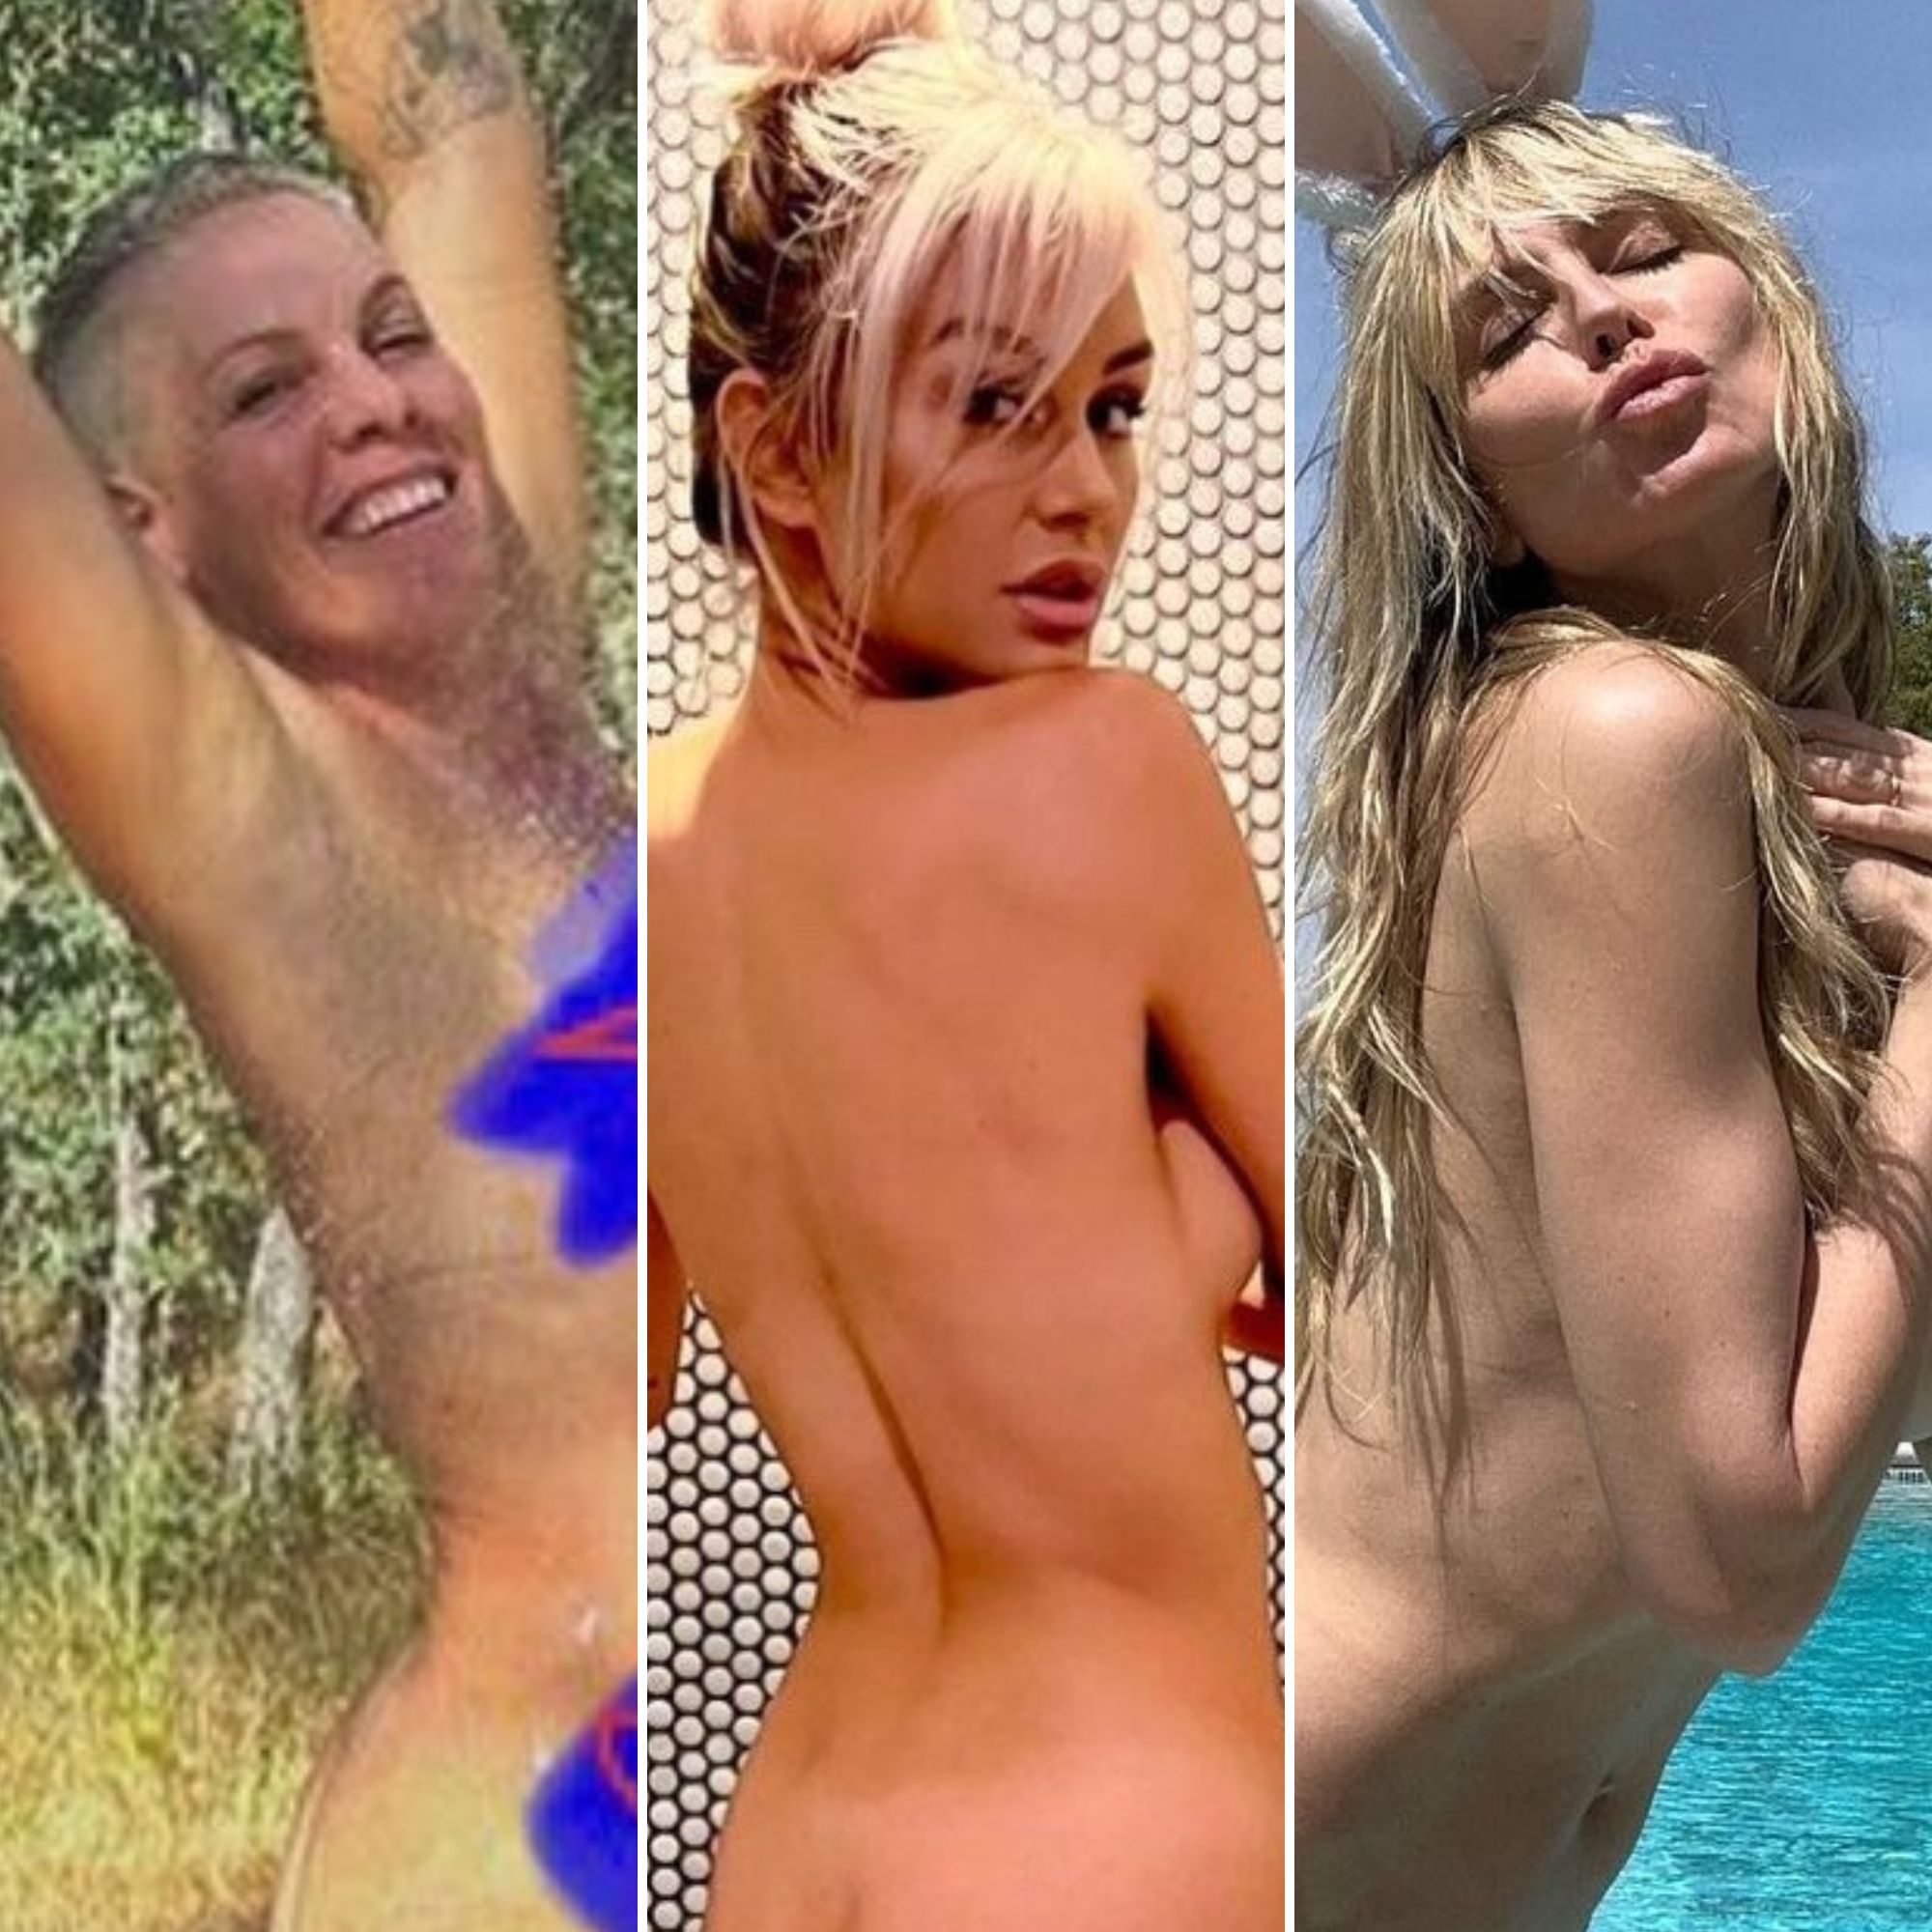 Celebrities Who Post Nude Photos: See Naked Pictures of Stars